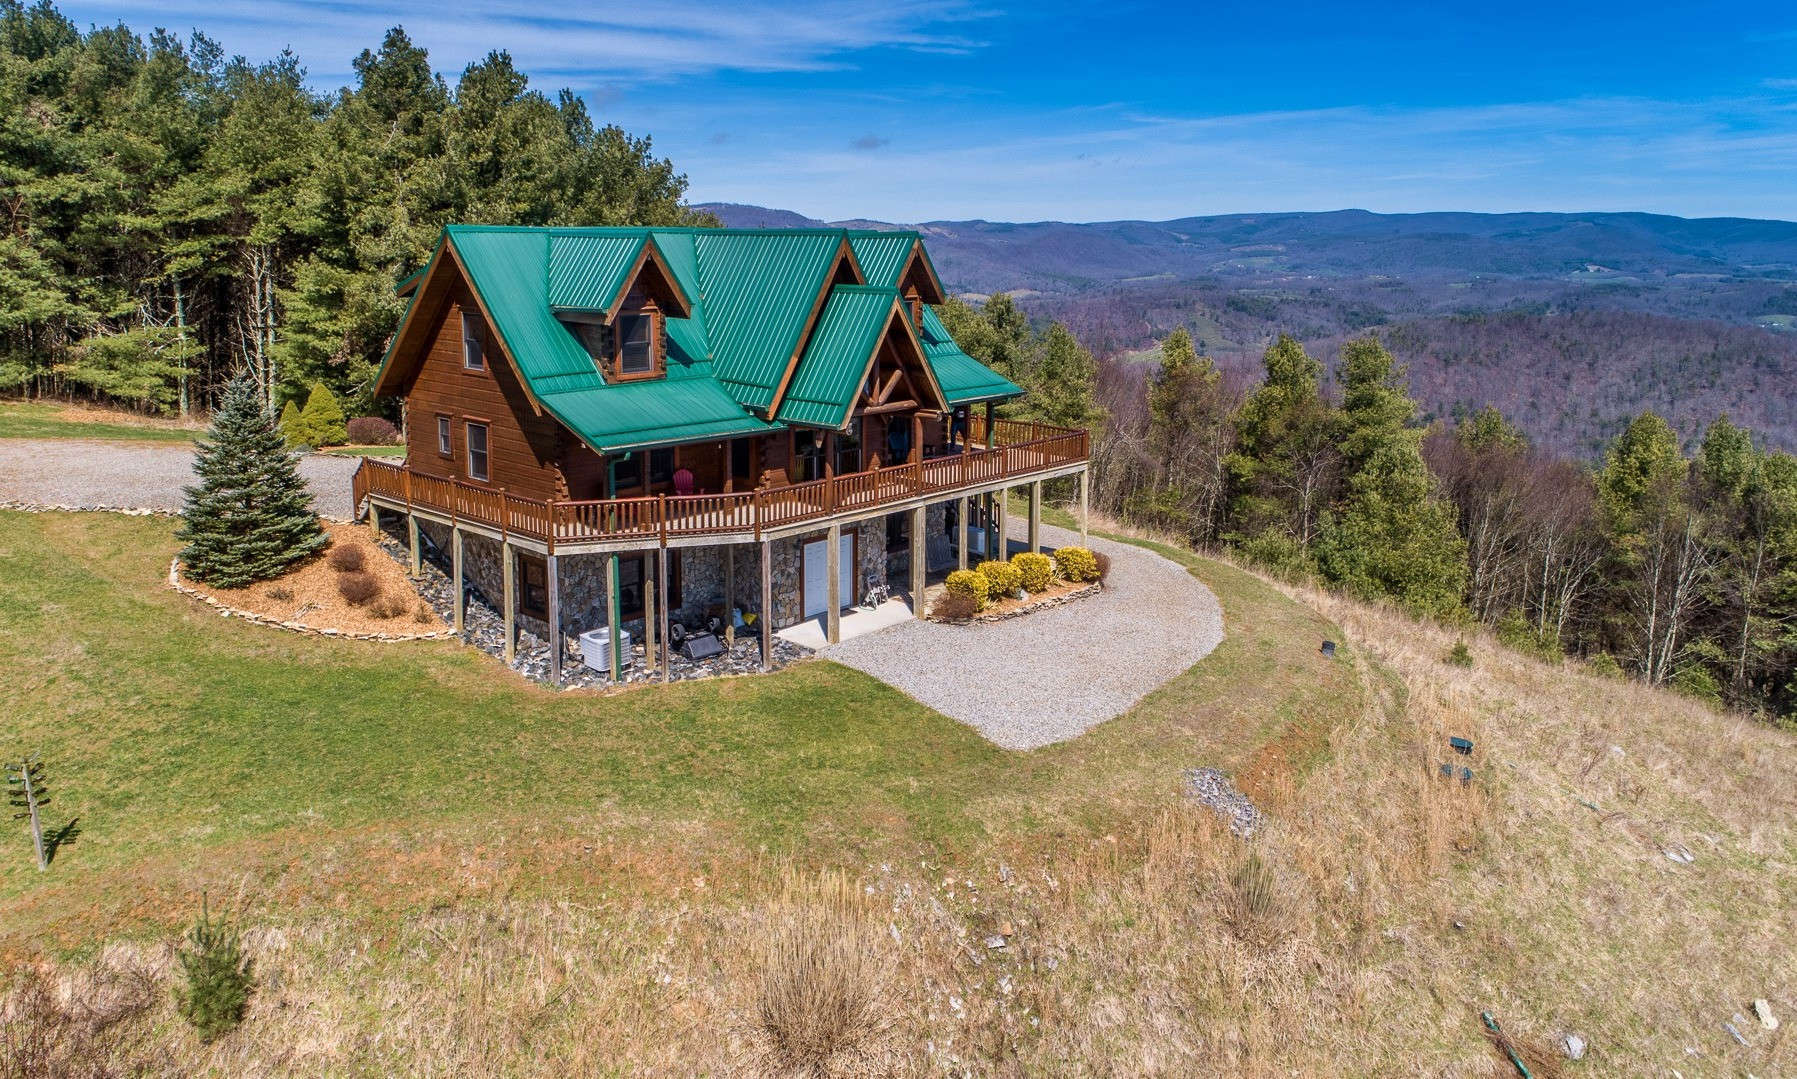 Majestically sited at the end of the road on a rambling 22+ acre setting high on Kindrick Mountain with panoramic long range mountain vista views, this fabulous 3-BR, 3.5-BA Jim Barna log home demonstrates the perfect blend of sophisticated & casual elements as well as quality materials & craftsmanship.